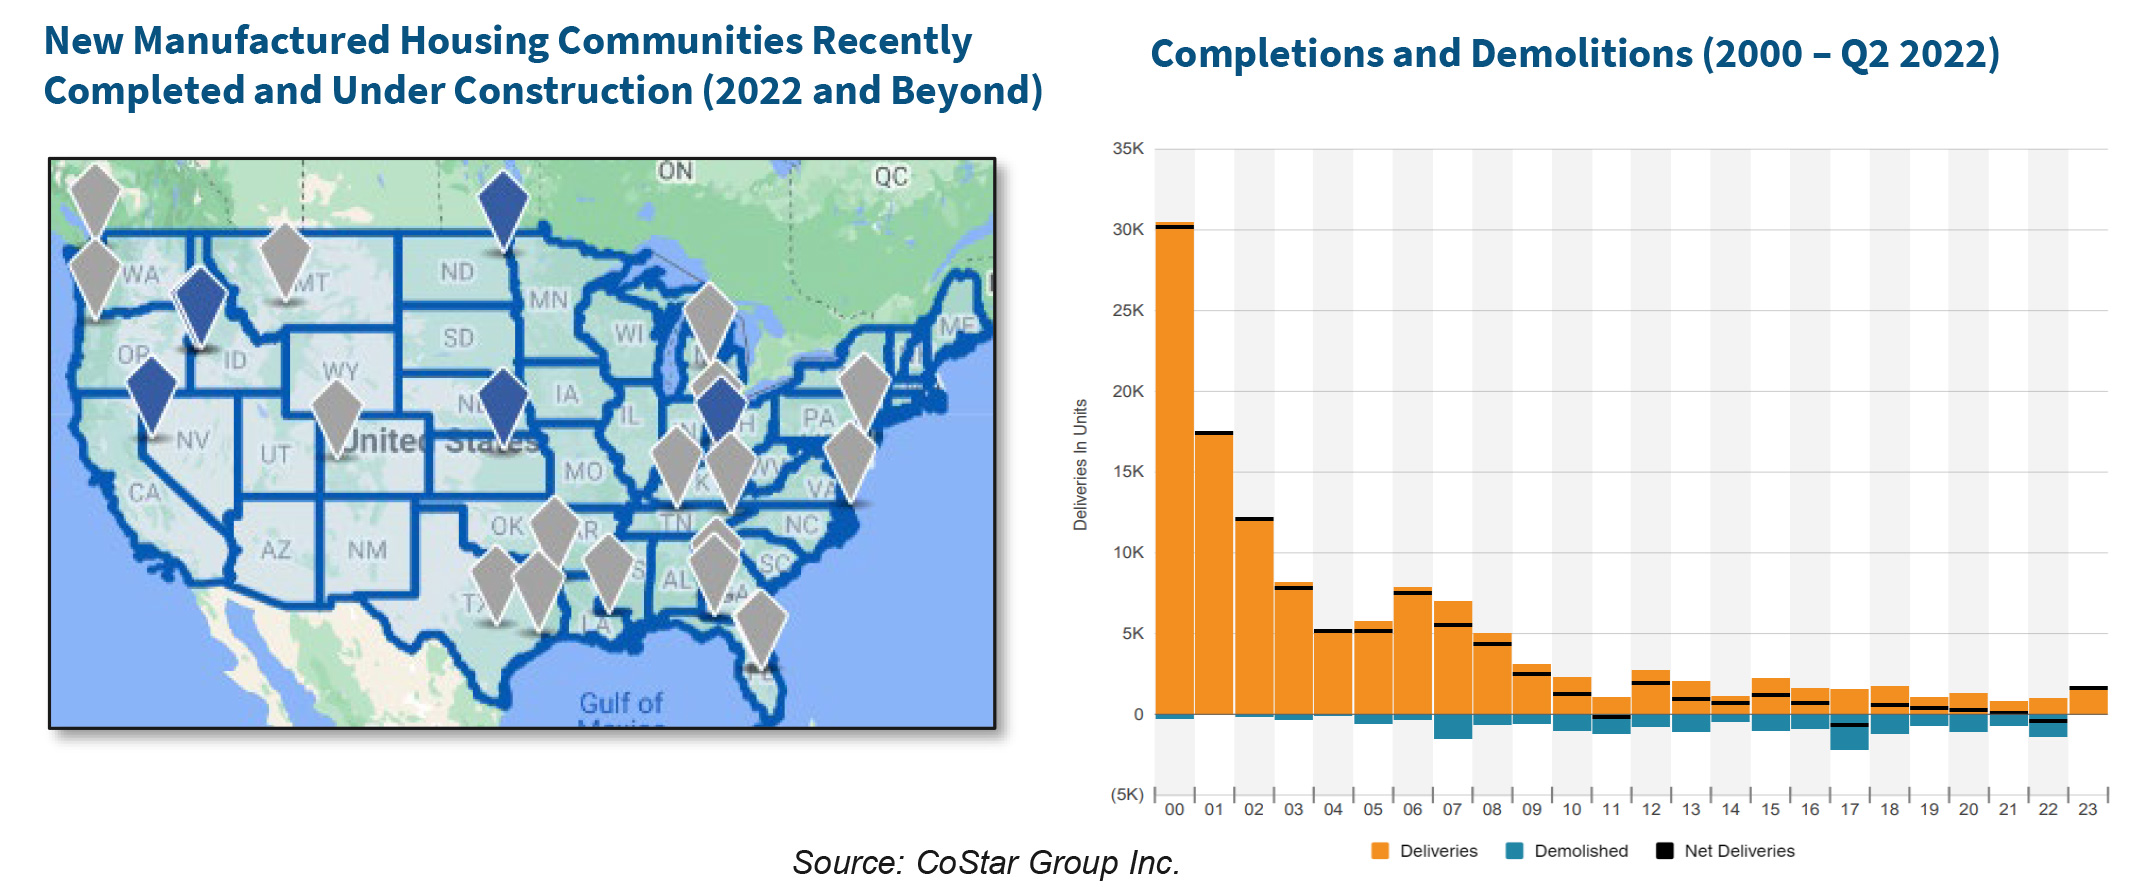 New Manufactured Housing Communities Recently Completions and Demolitions (2000 – Q2 2022) Completed and Under Construction (2022 and Beyond)